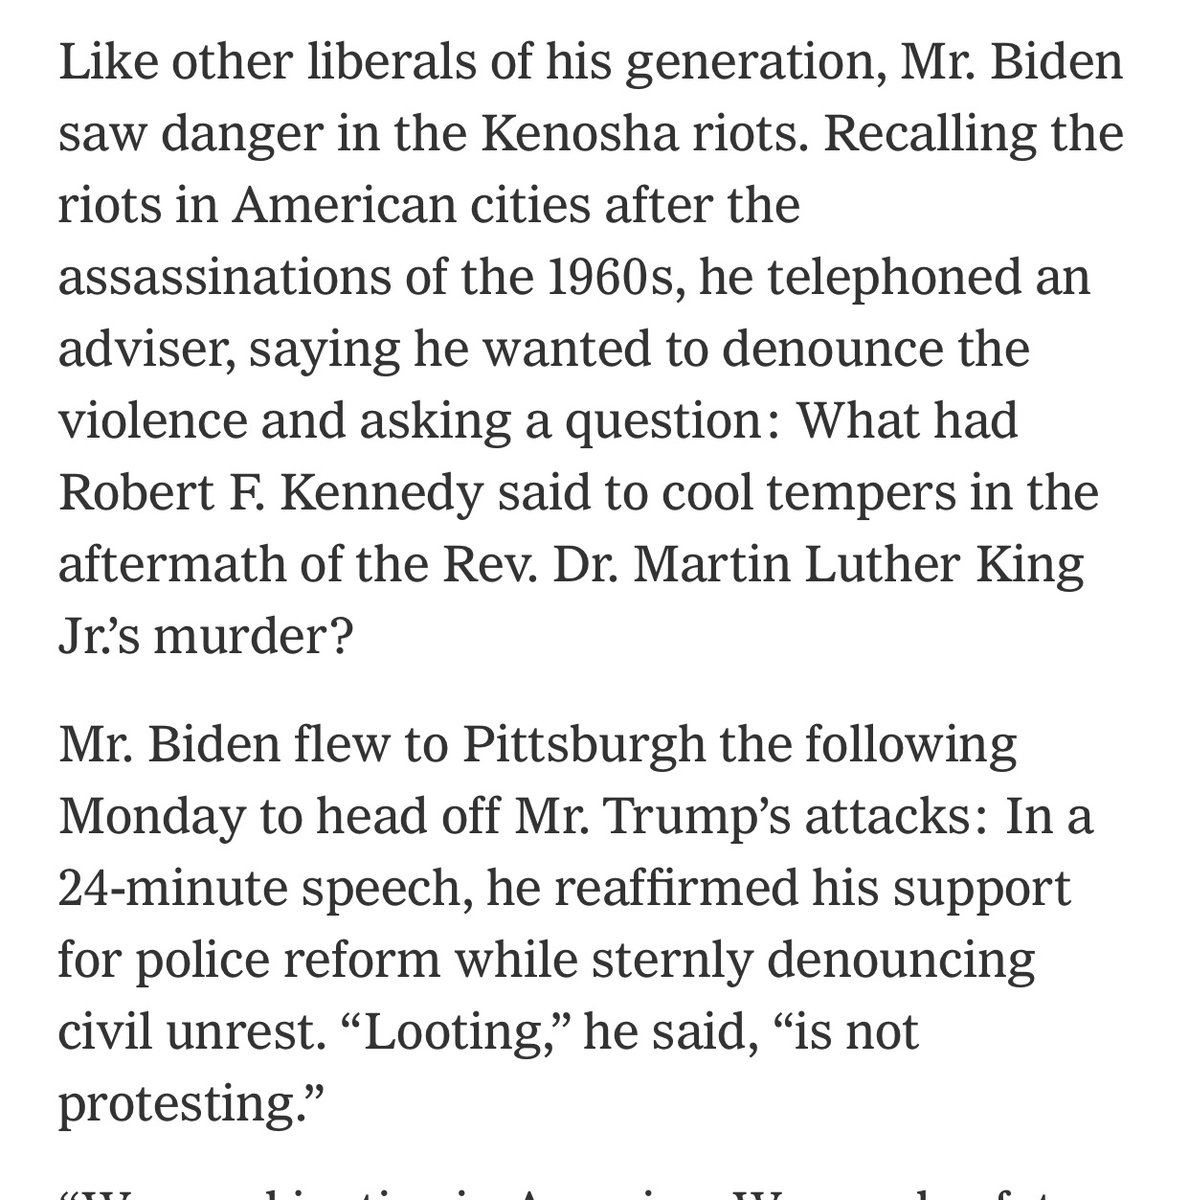 The most dangerous moment of the general election for Biden may have come with Trump’s law-and-order onslaught after Kenosha. It was not just anxious Dem voters of a certain generation who heard the echo of 1968. So did Biden, and he acted accordingly. https://www.nytimes.com/2020/11/07/us/politics/joe-biden-president.html